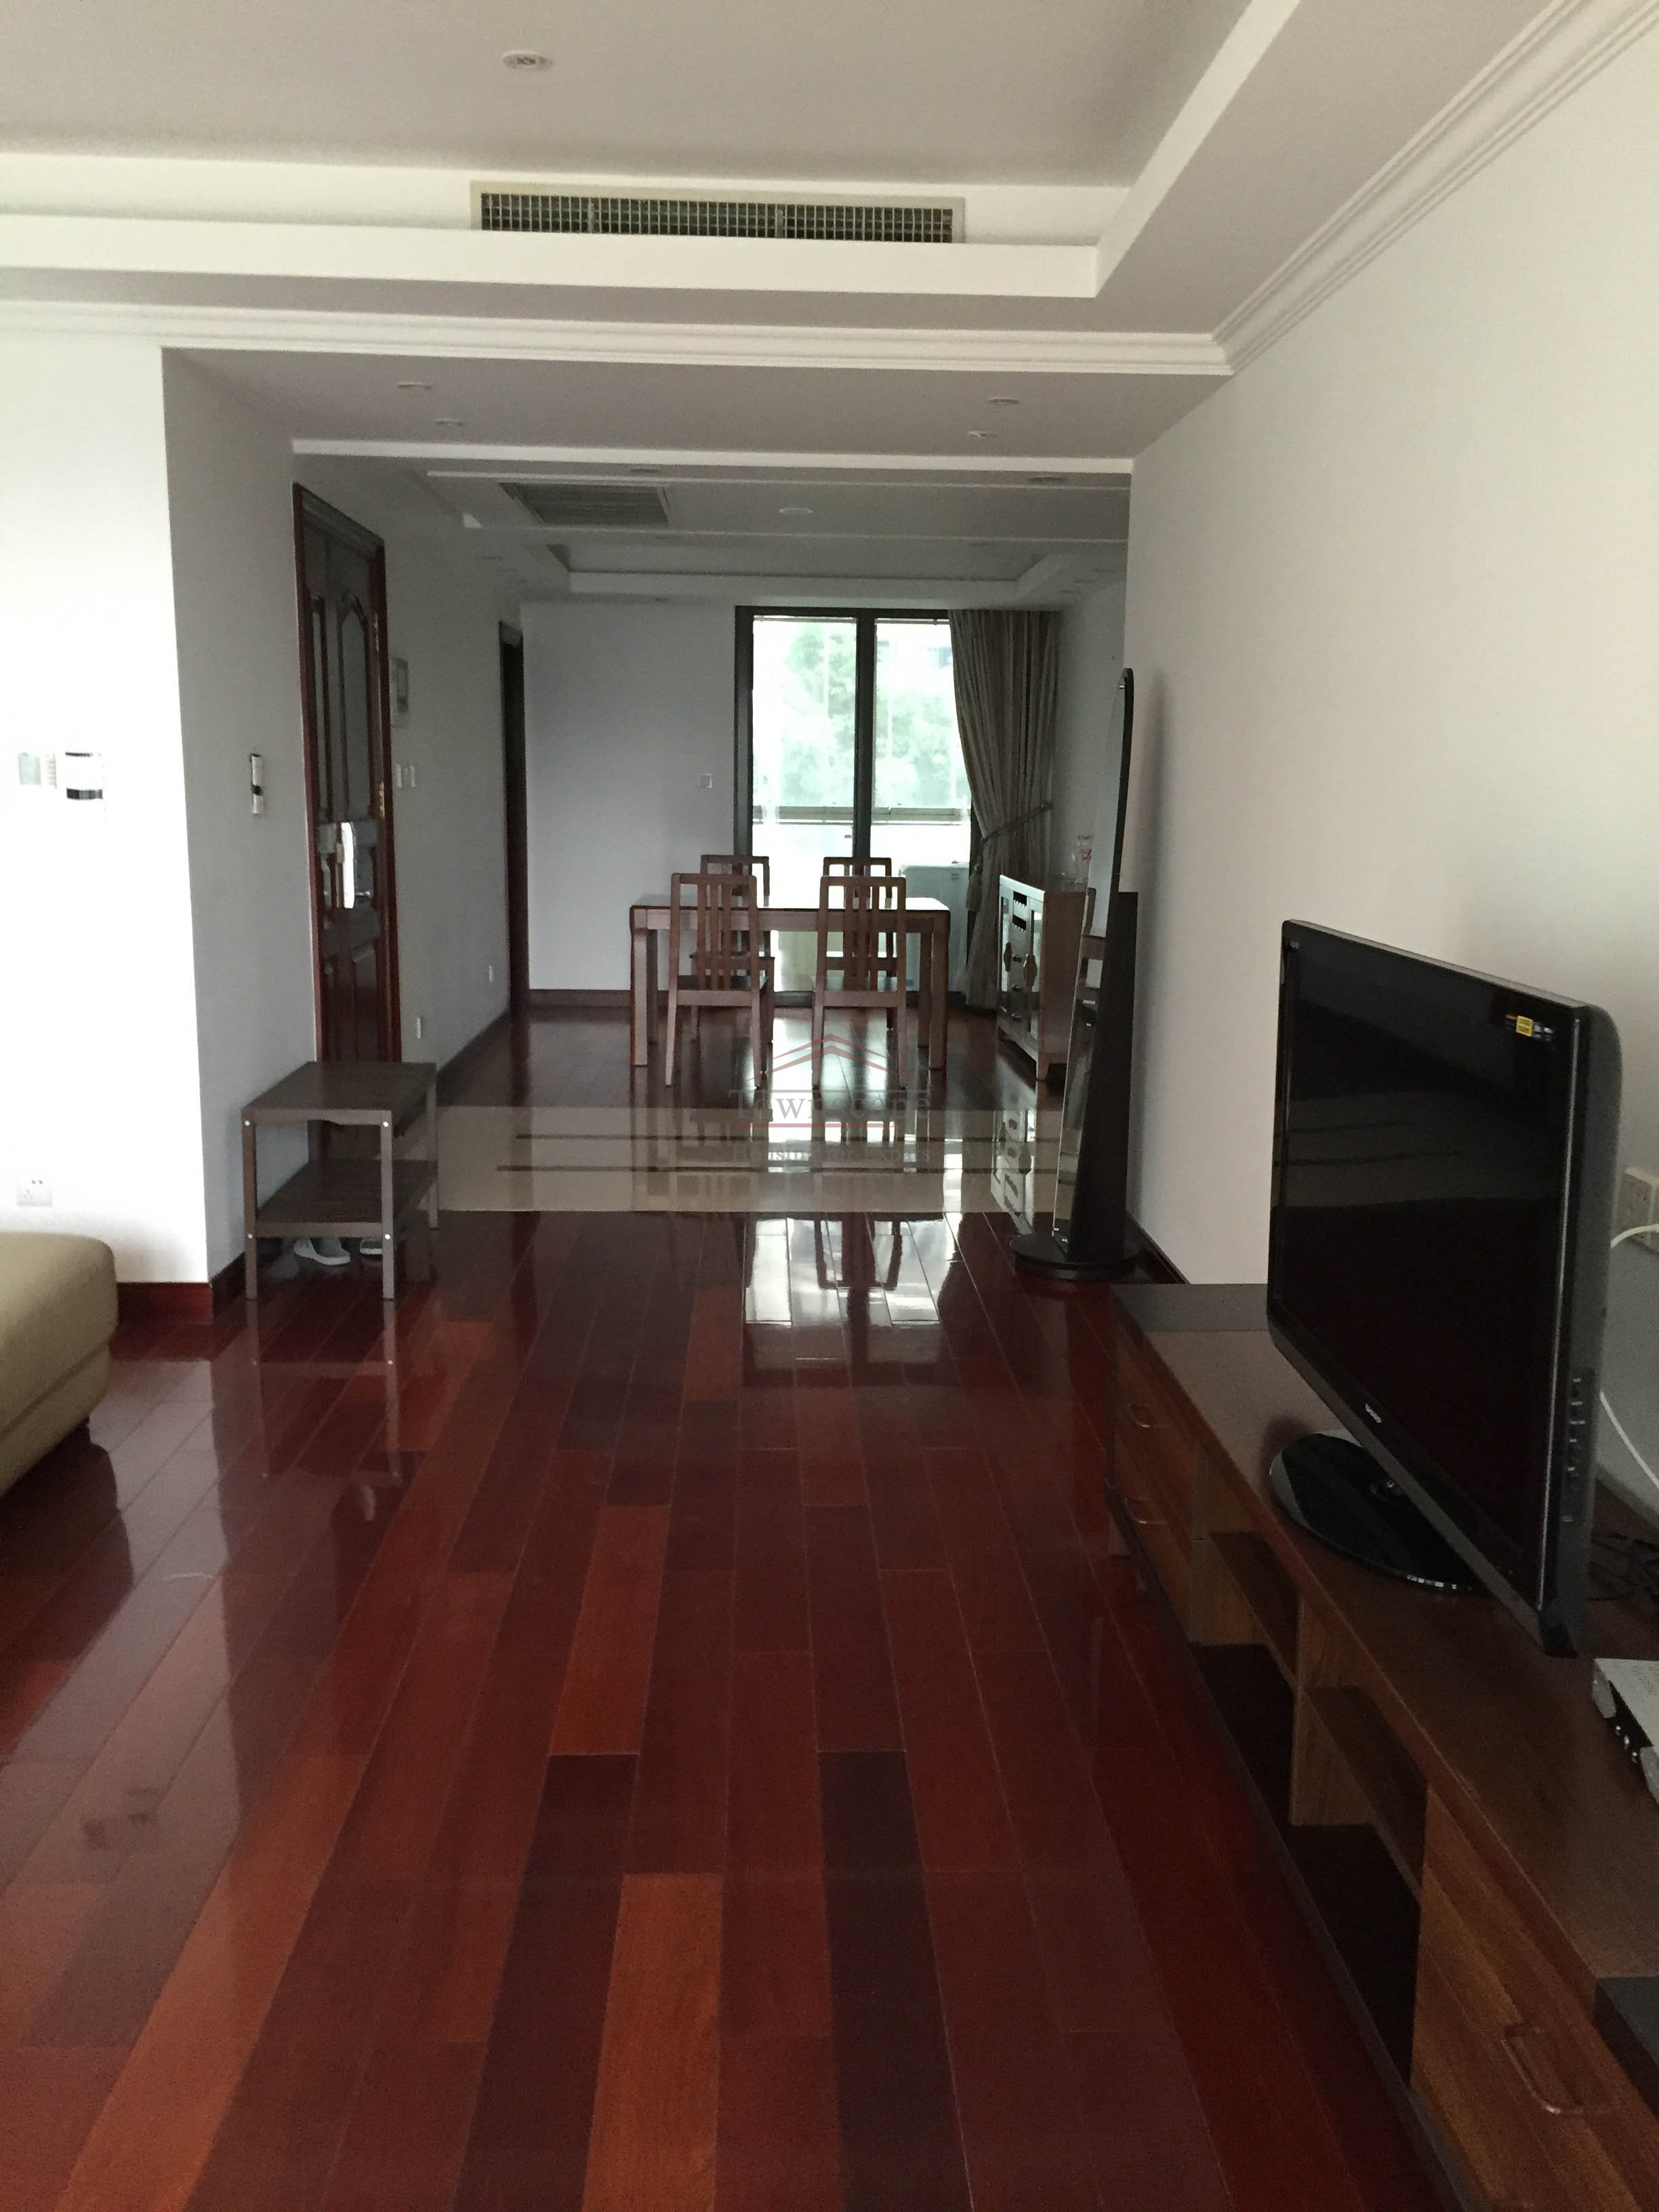 rent in Shanghai Renovated 5 BR Apartment in Central Shanghai Line 1